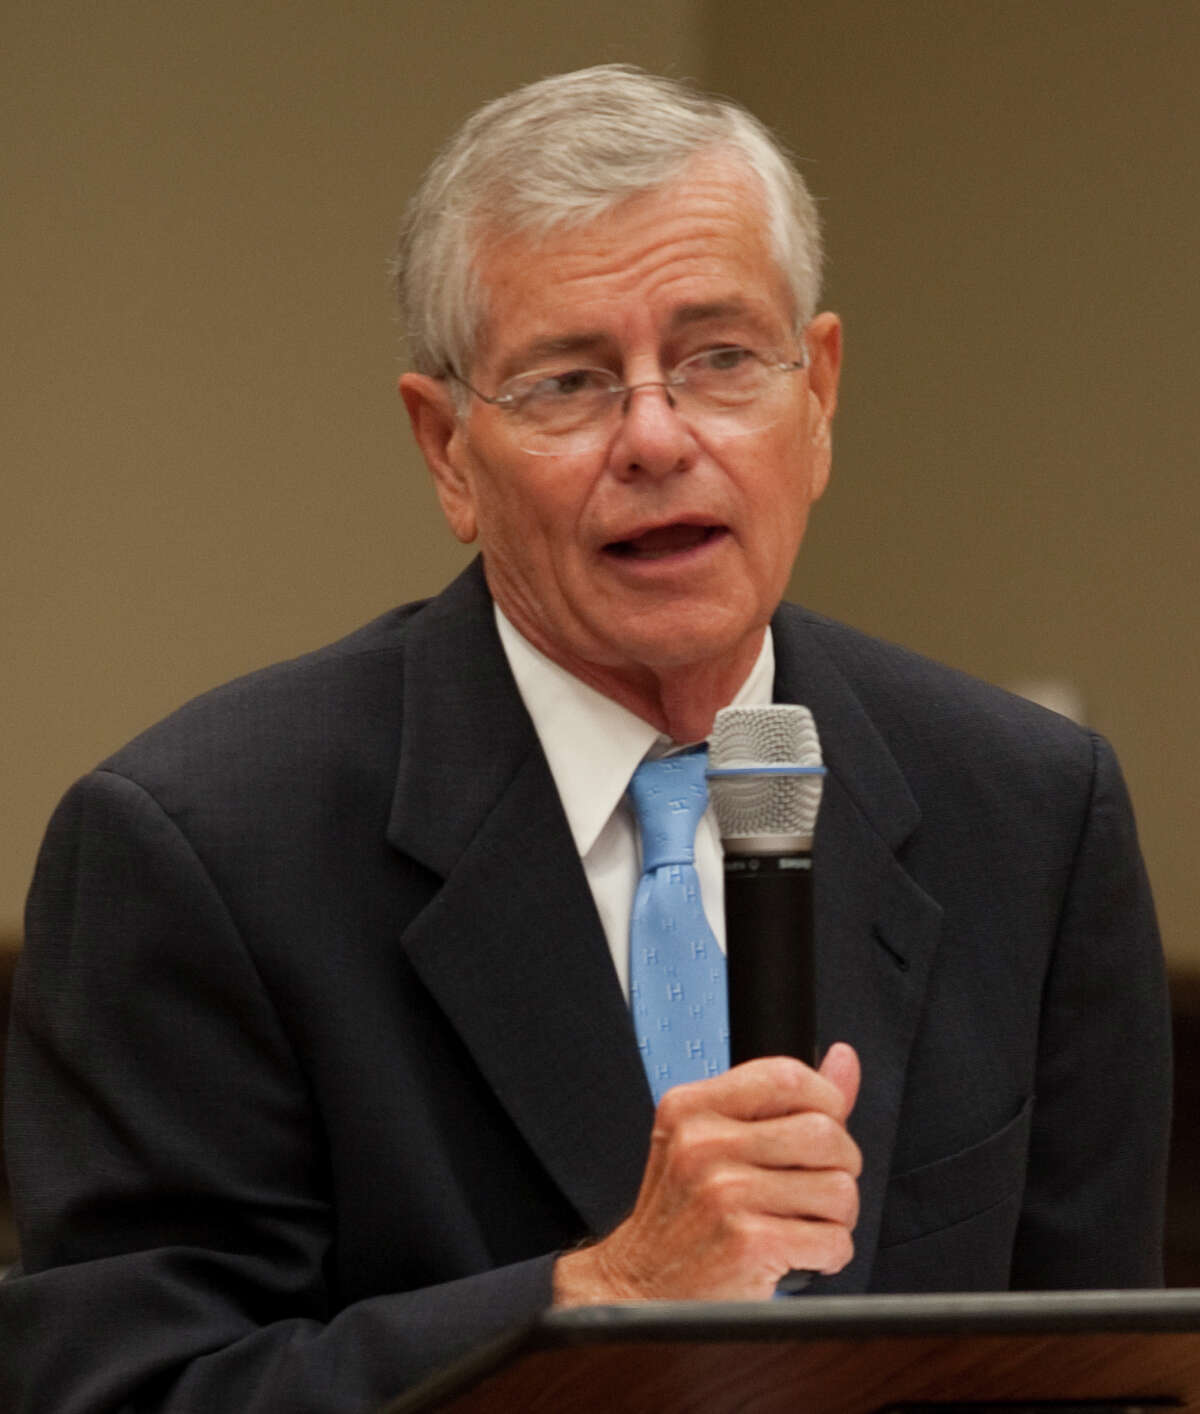 State Rep. Tom Craddick, R-Midland, has proposed a texting ban in each legislative session since 2011.